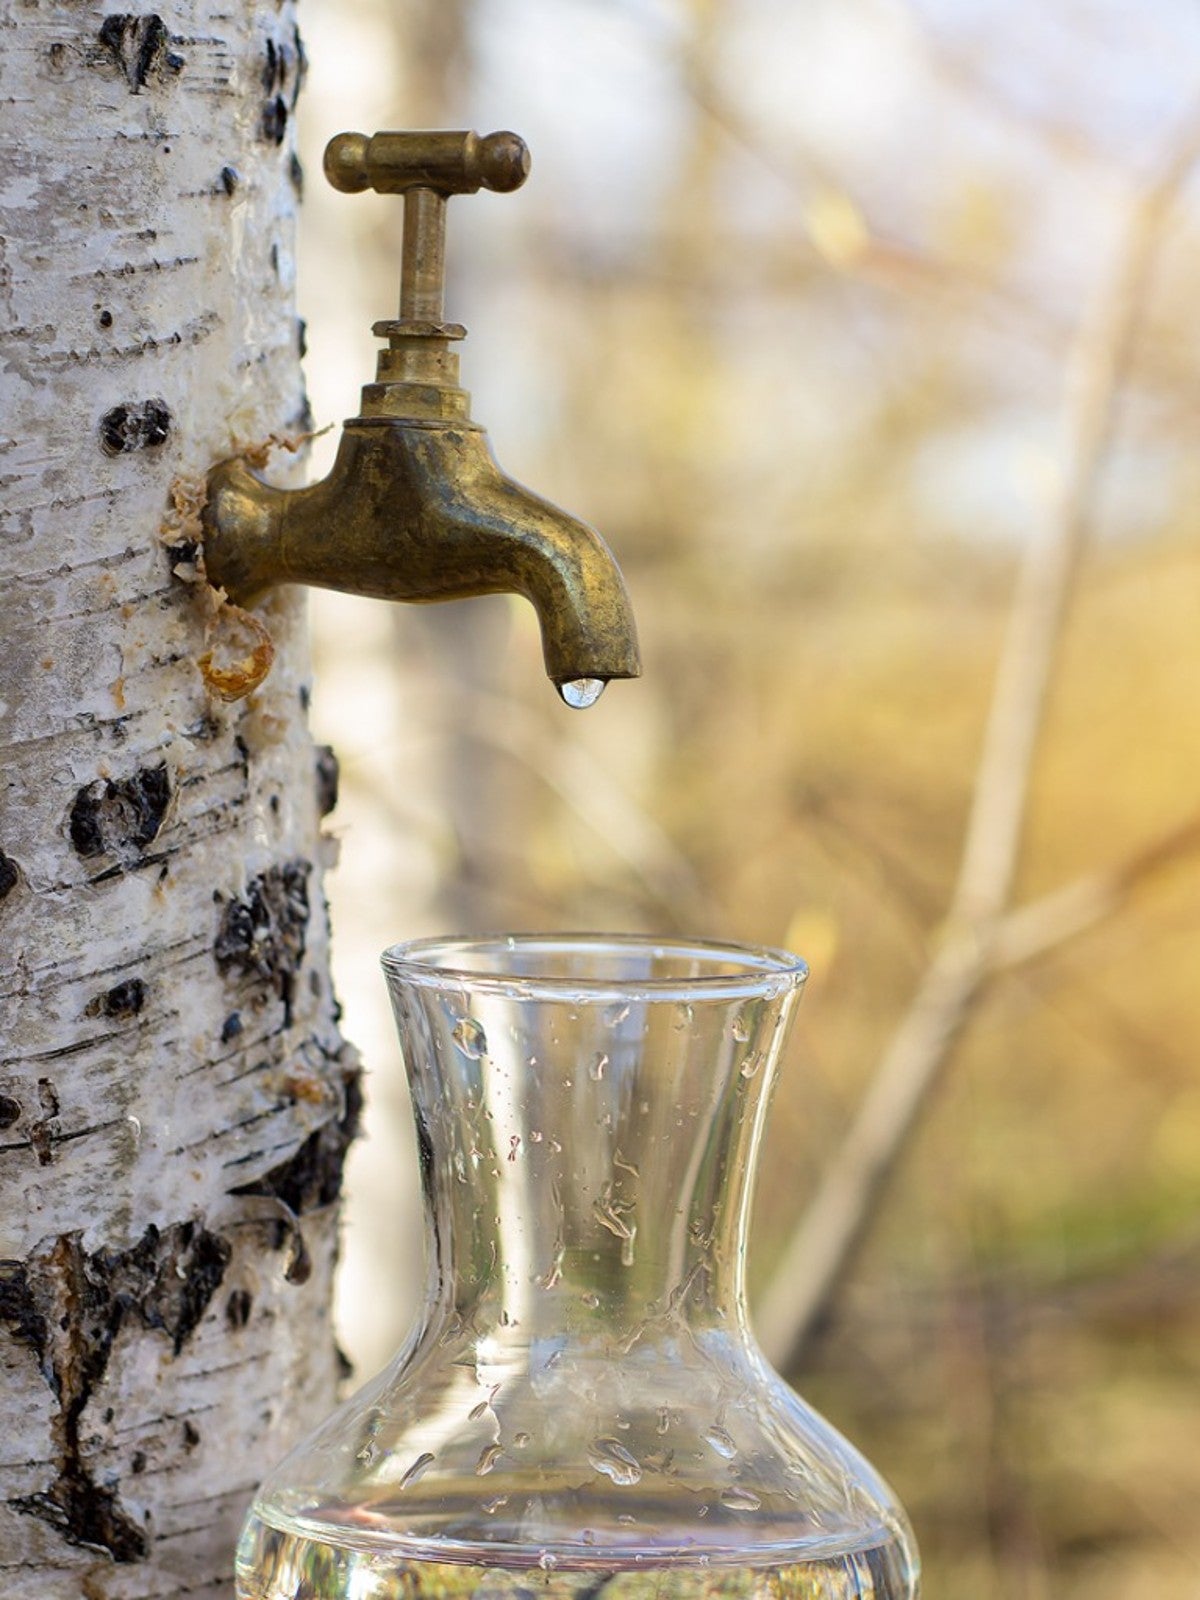 Birch sap: how to extract and use it